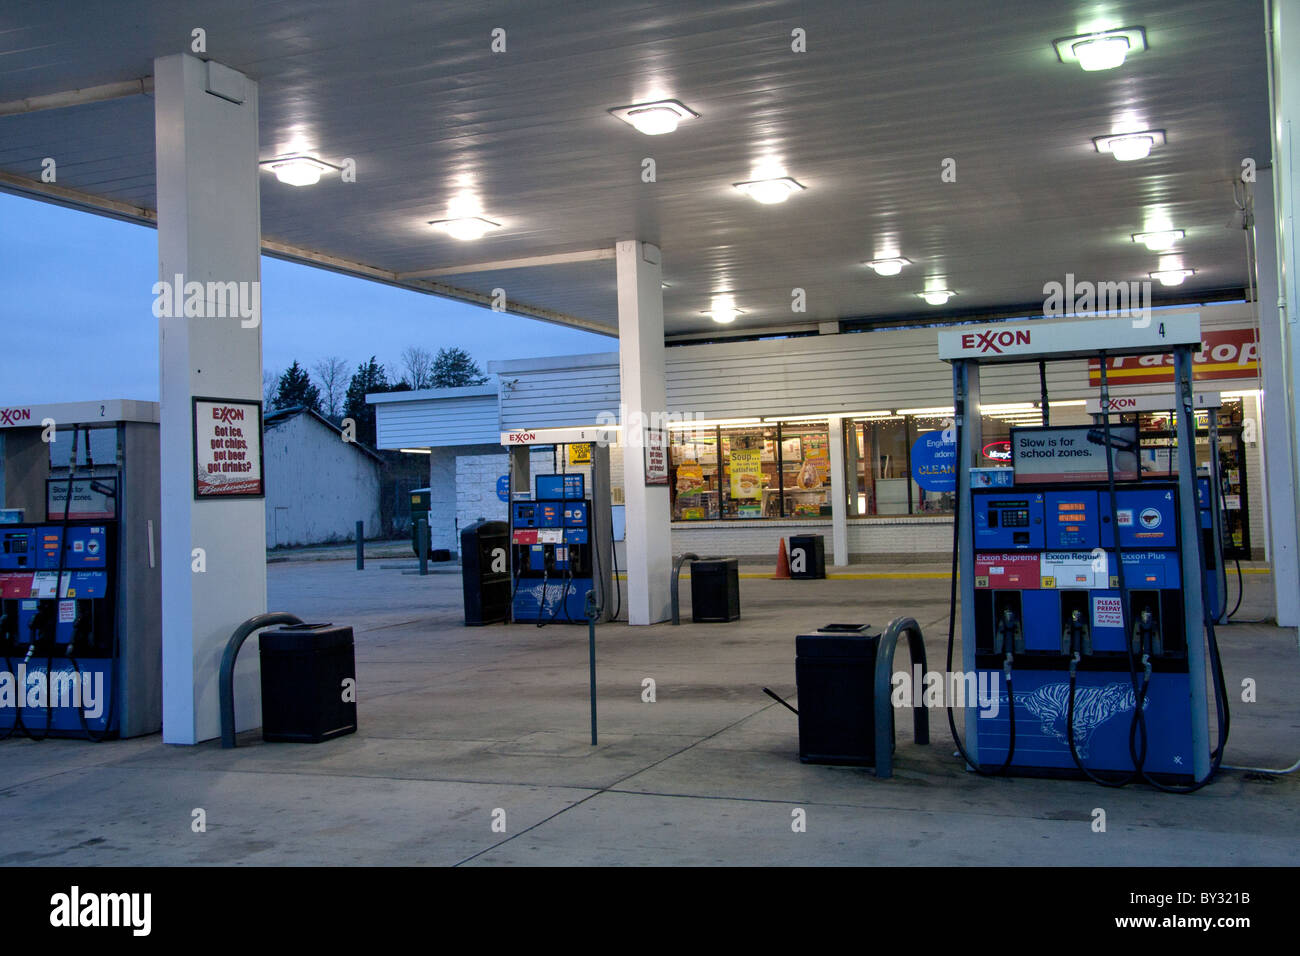 Exxon gas station with pumps Stock Photo